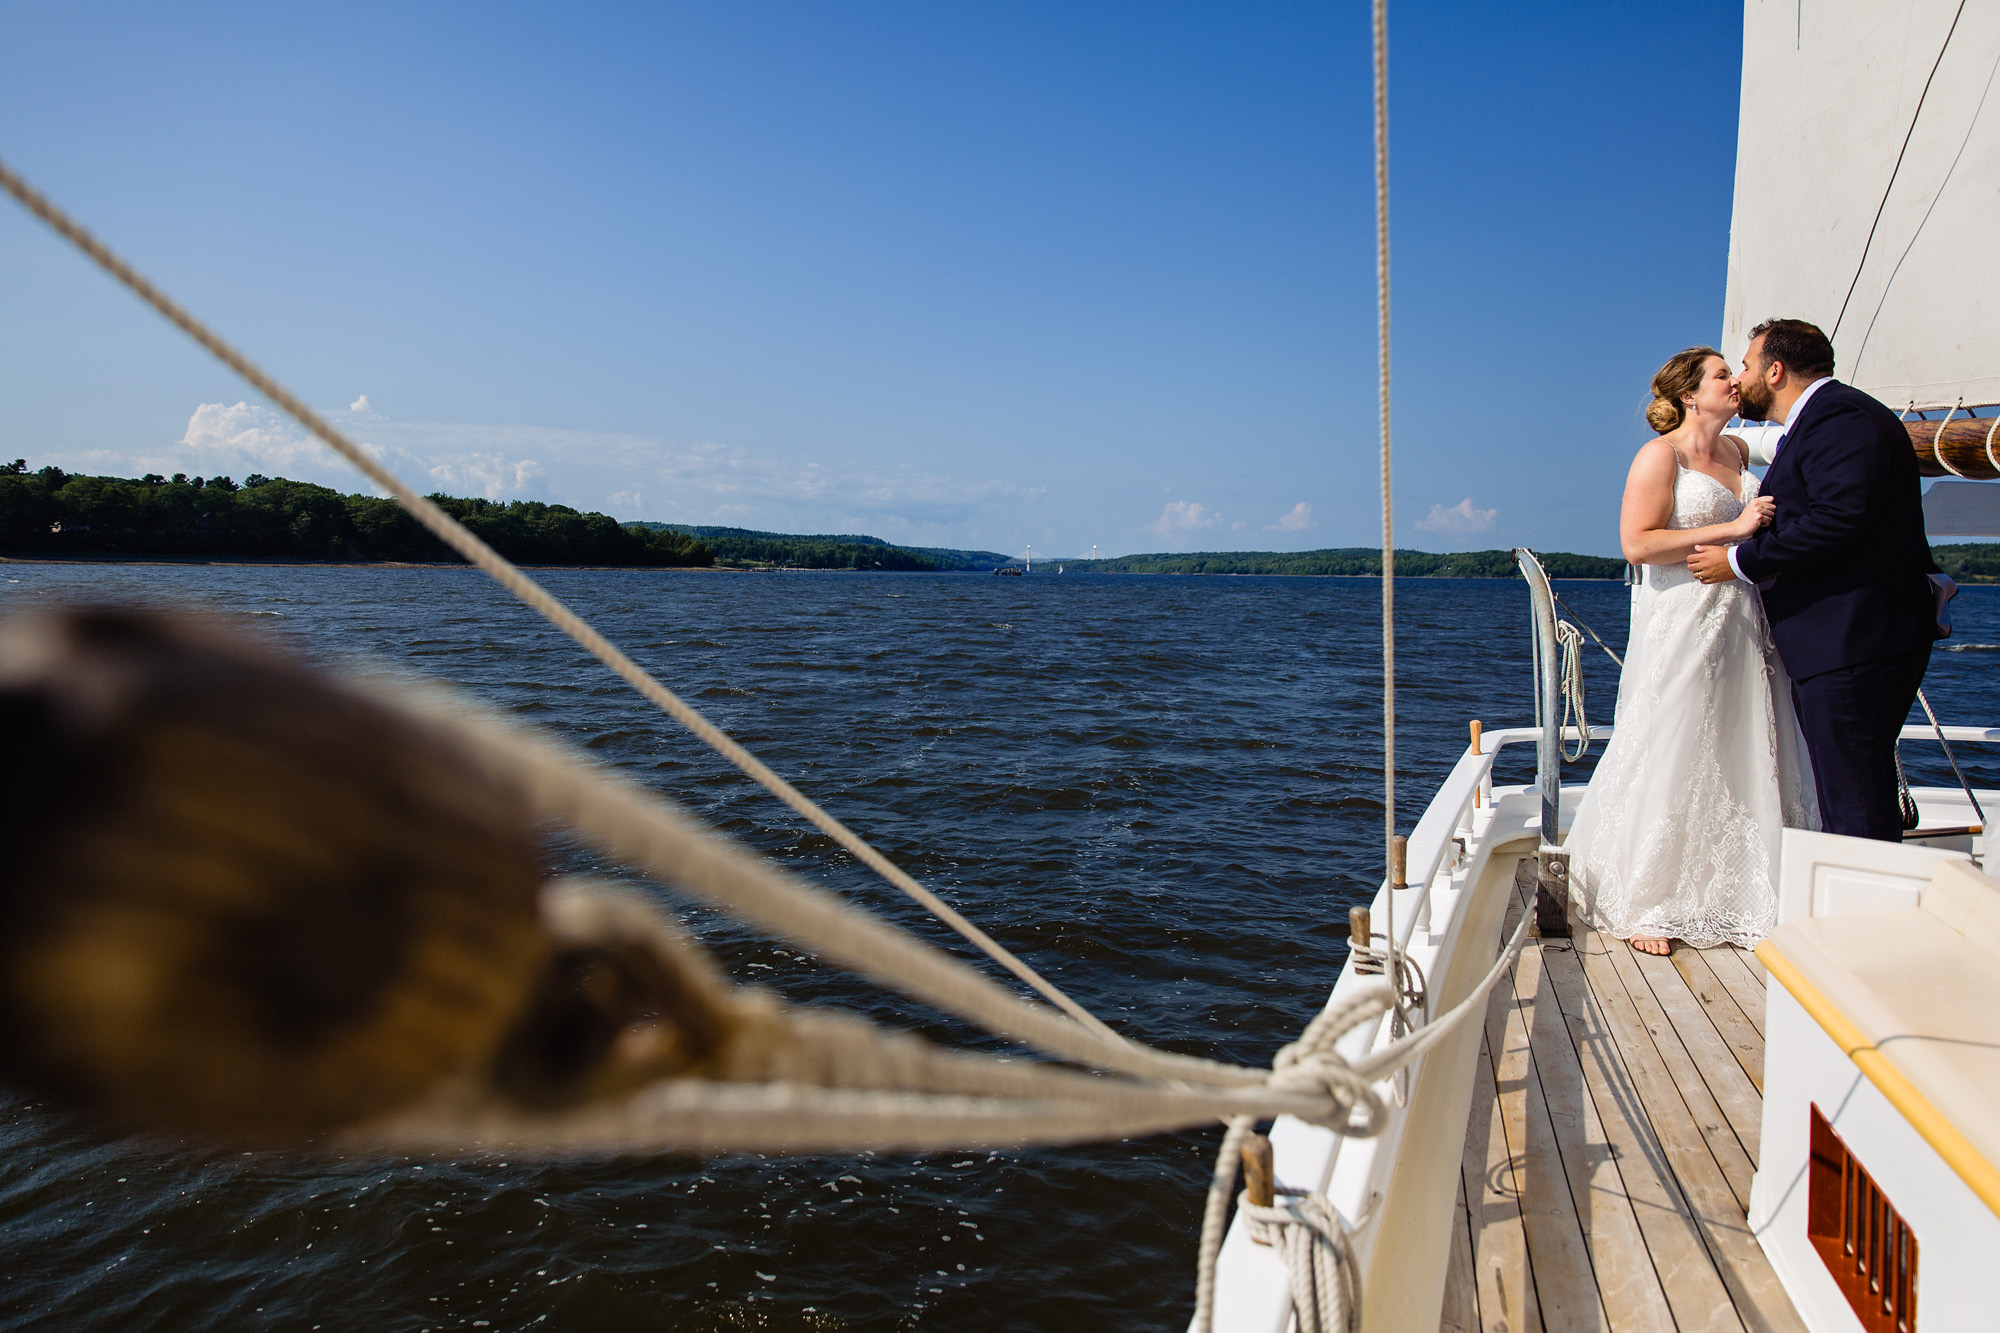 Wedding portraits of the bride and groom on a sailboat at French's Point in Maine